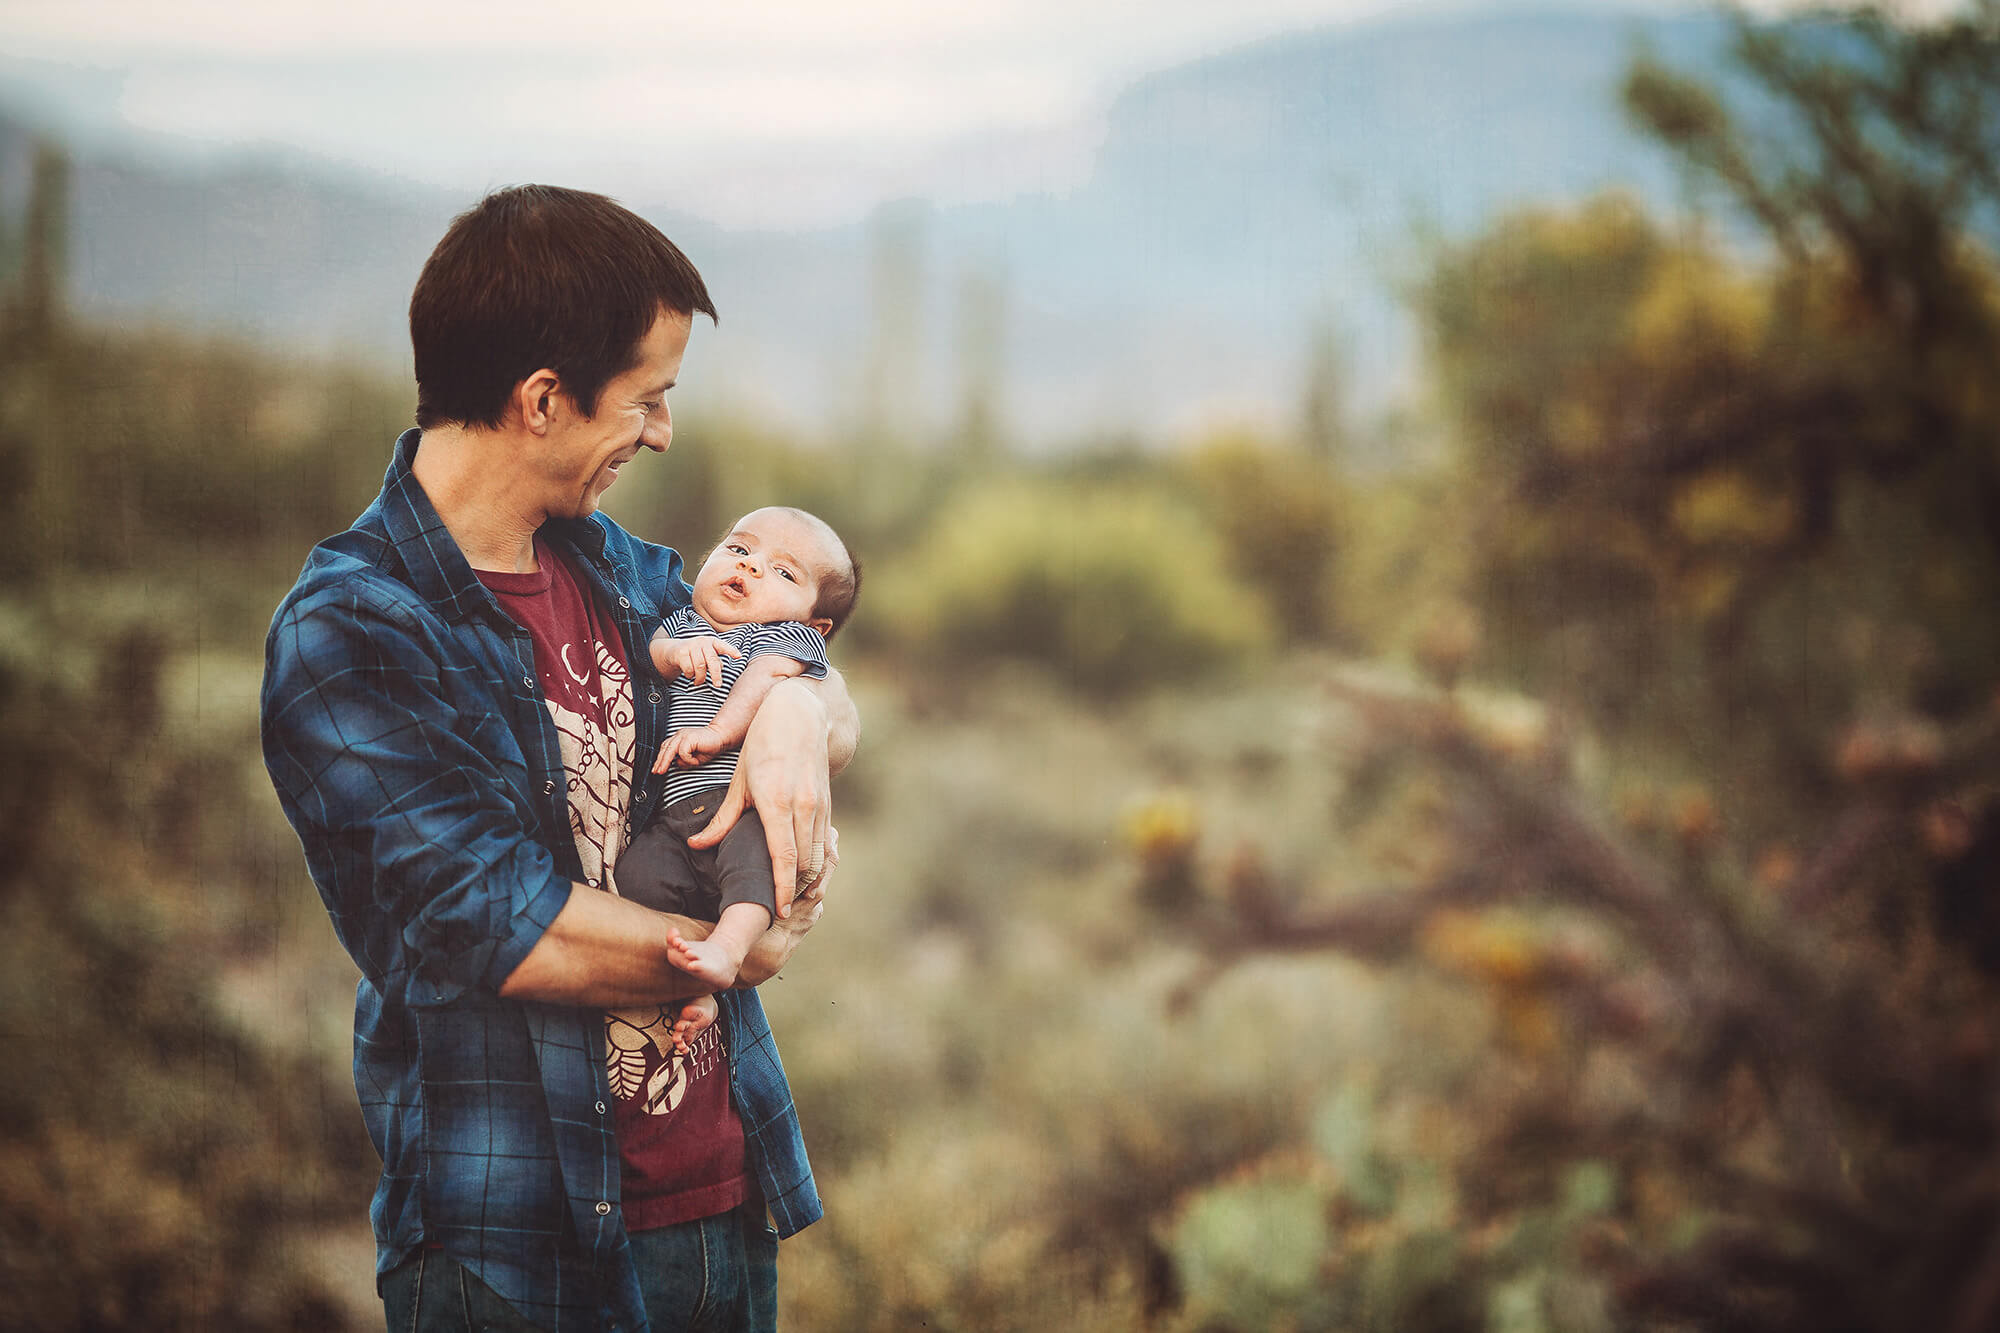 Dad bounces his newborn baby boy to calm him during their cool spring family photo session.